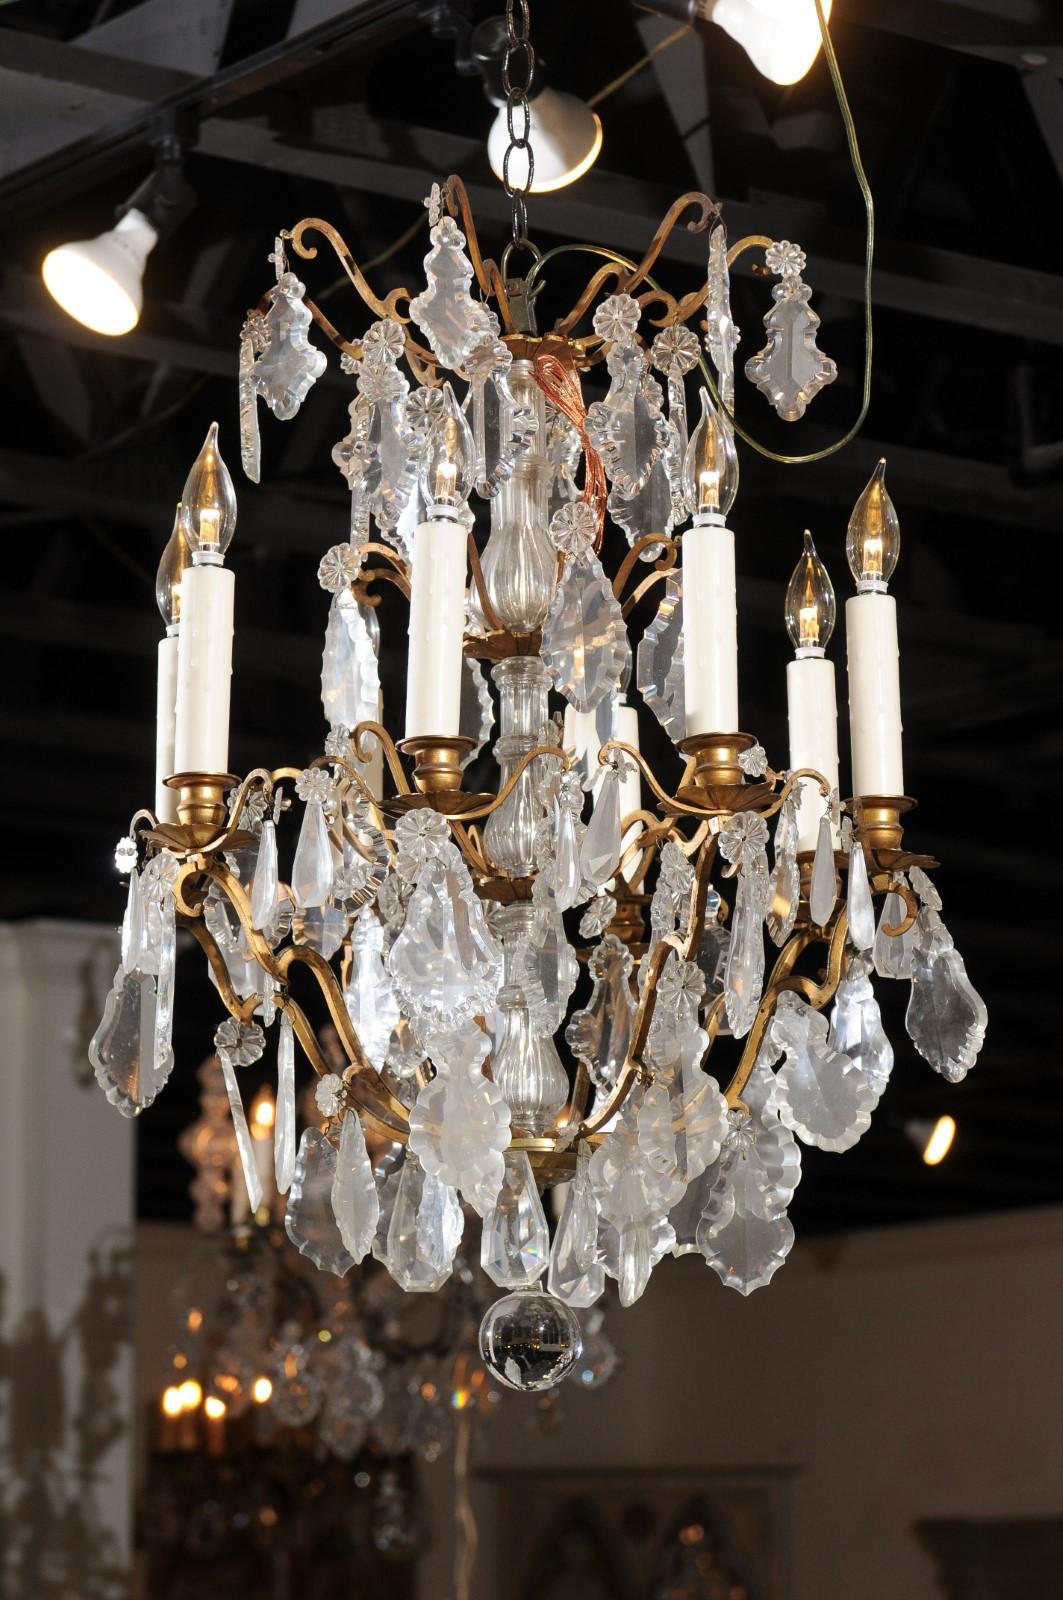 A French eight-light Baccarat crystal chandelier from the 19th century, with scrolling brass armature. Born in the Lorraine region of France in the Baccarat manufacture, this exquisite chandelier features a central crystal column connected to a